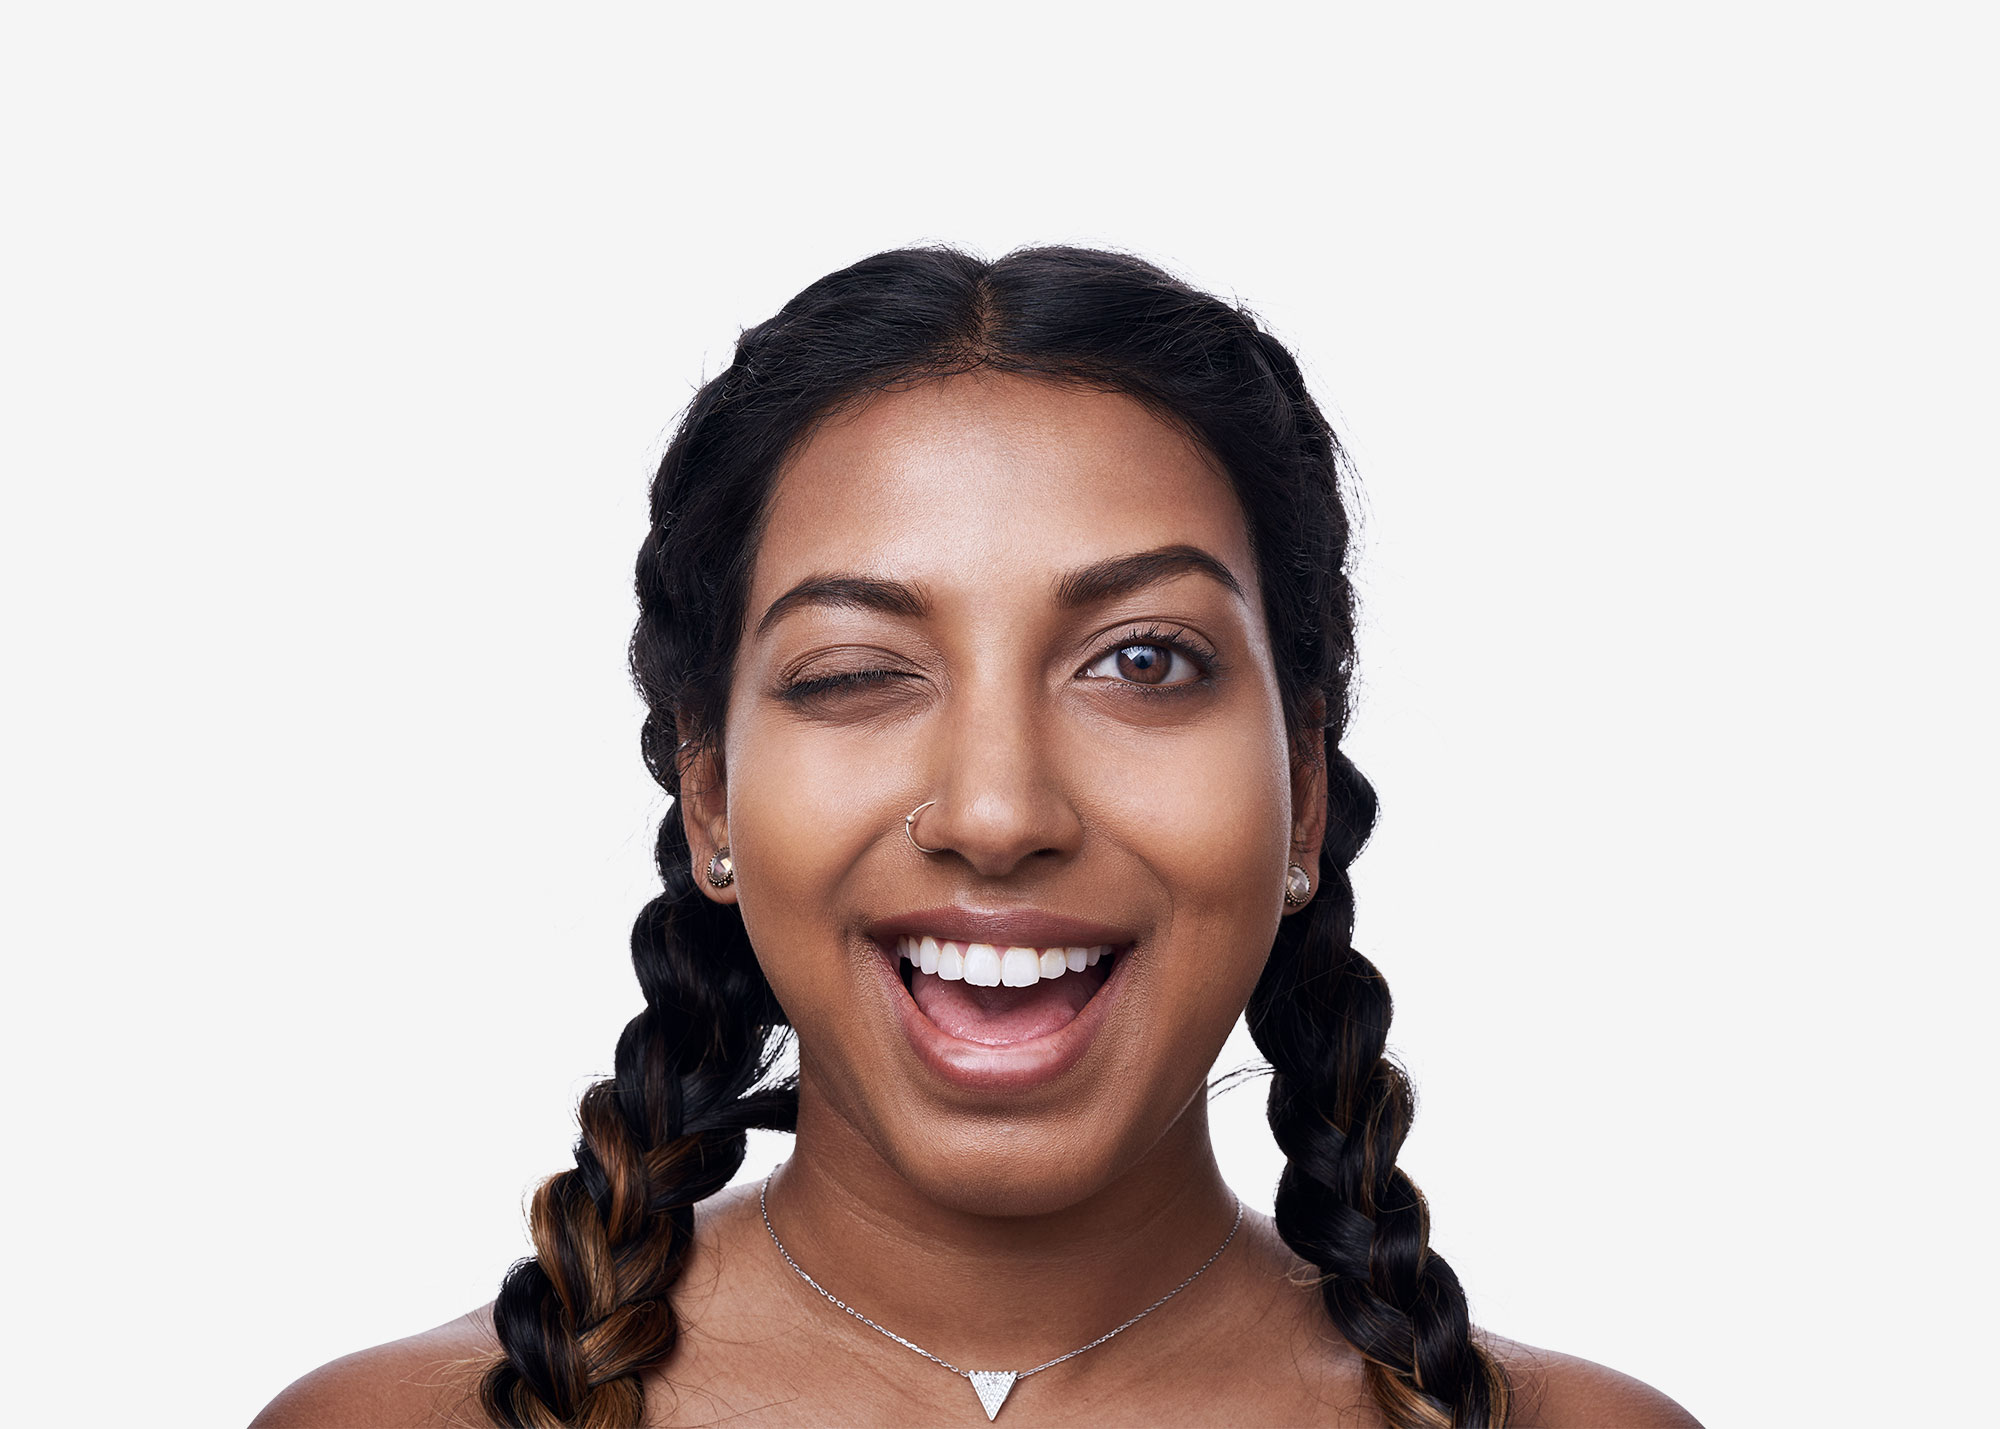 Waldo-contact-lenses-see-the-happiness-campaign-indian-girl-smiling-sane-seven-2000px-wide